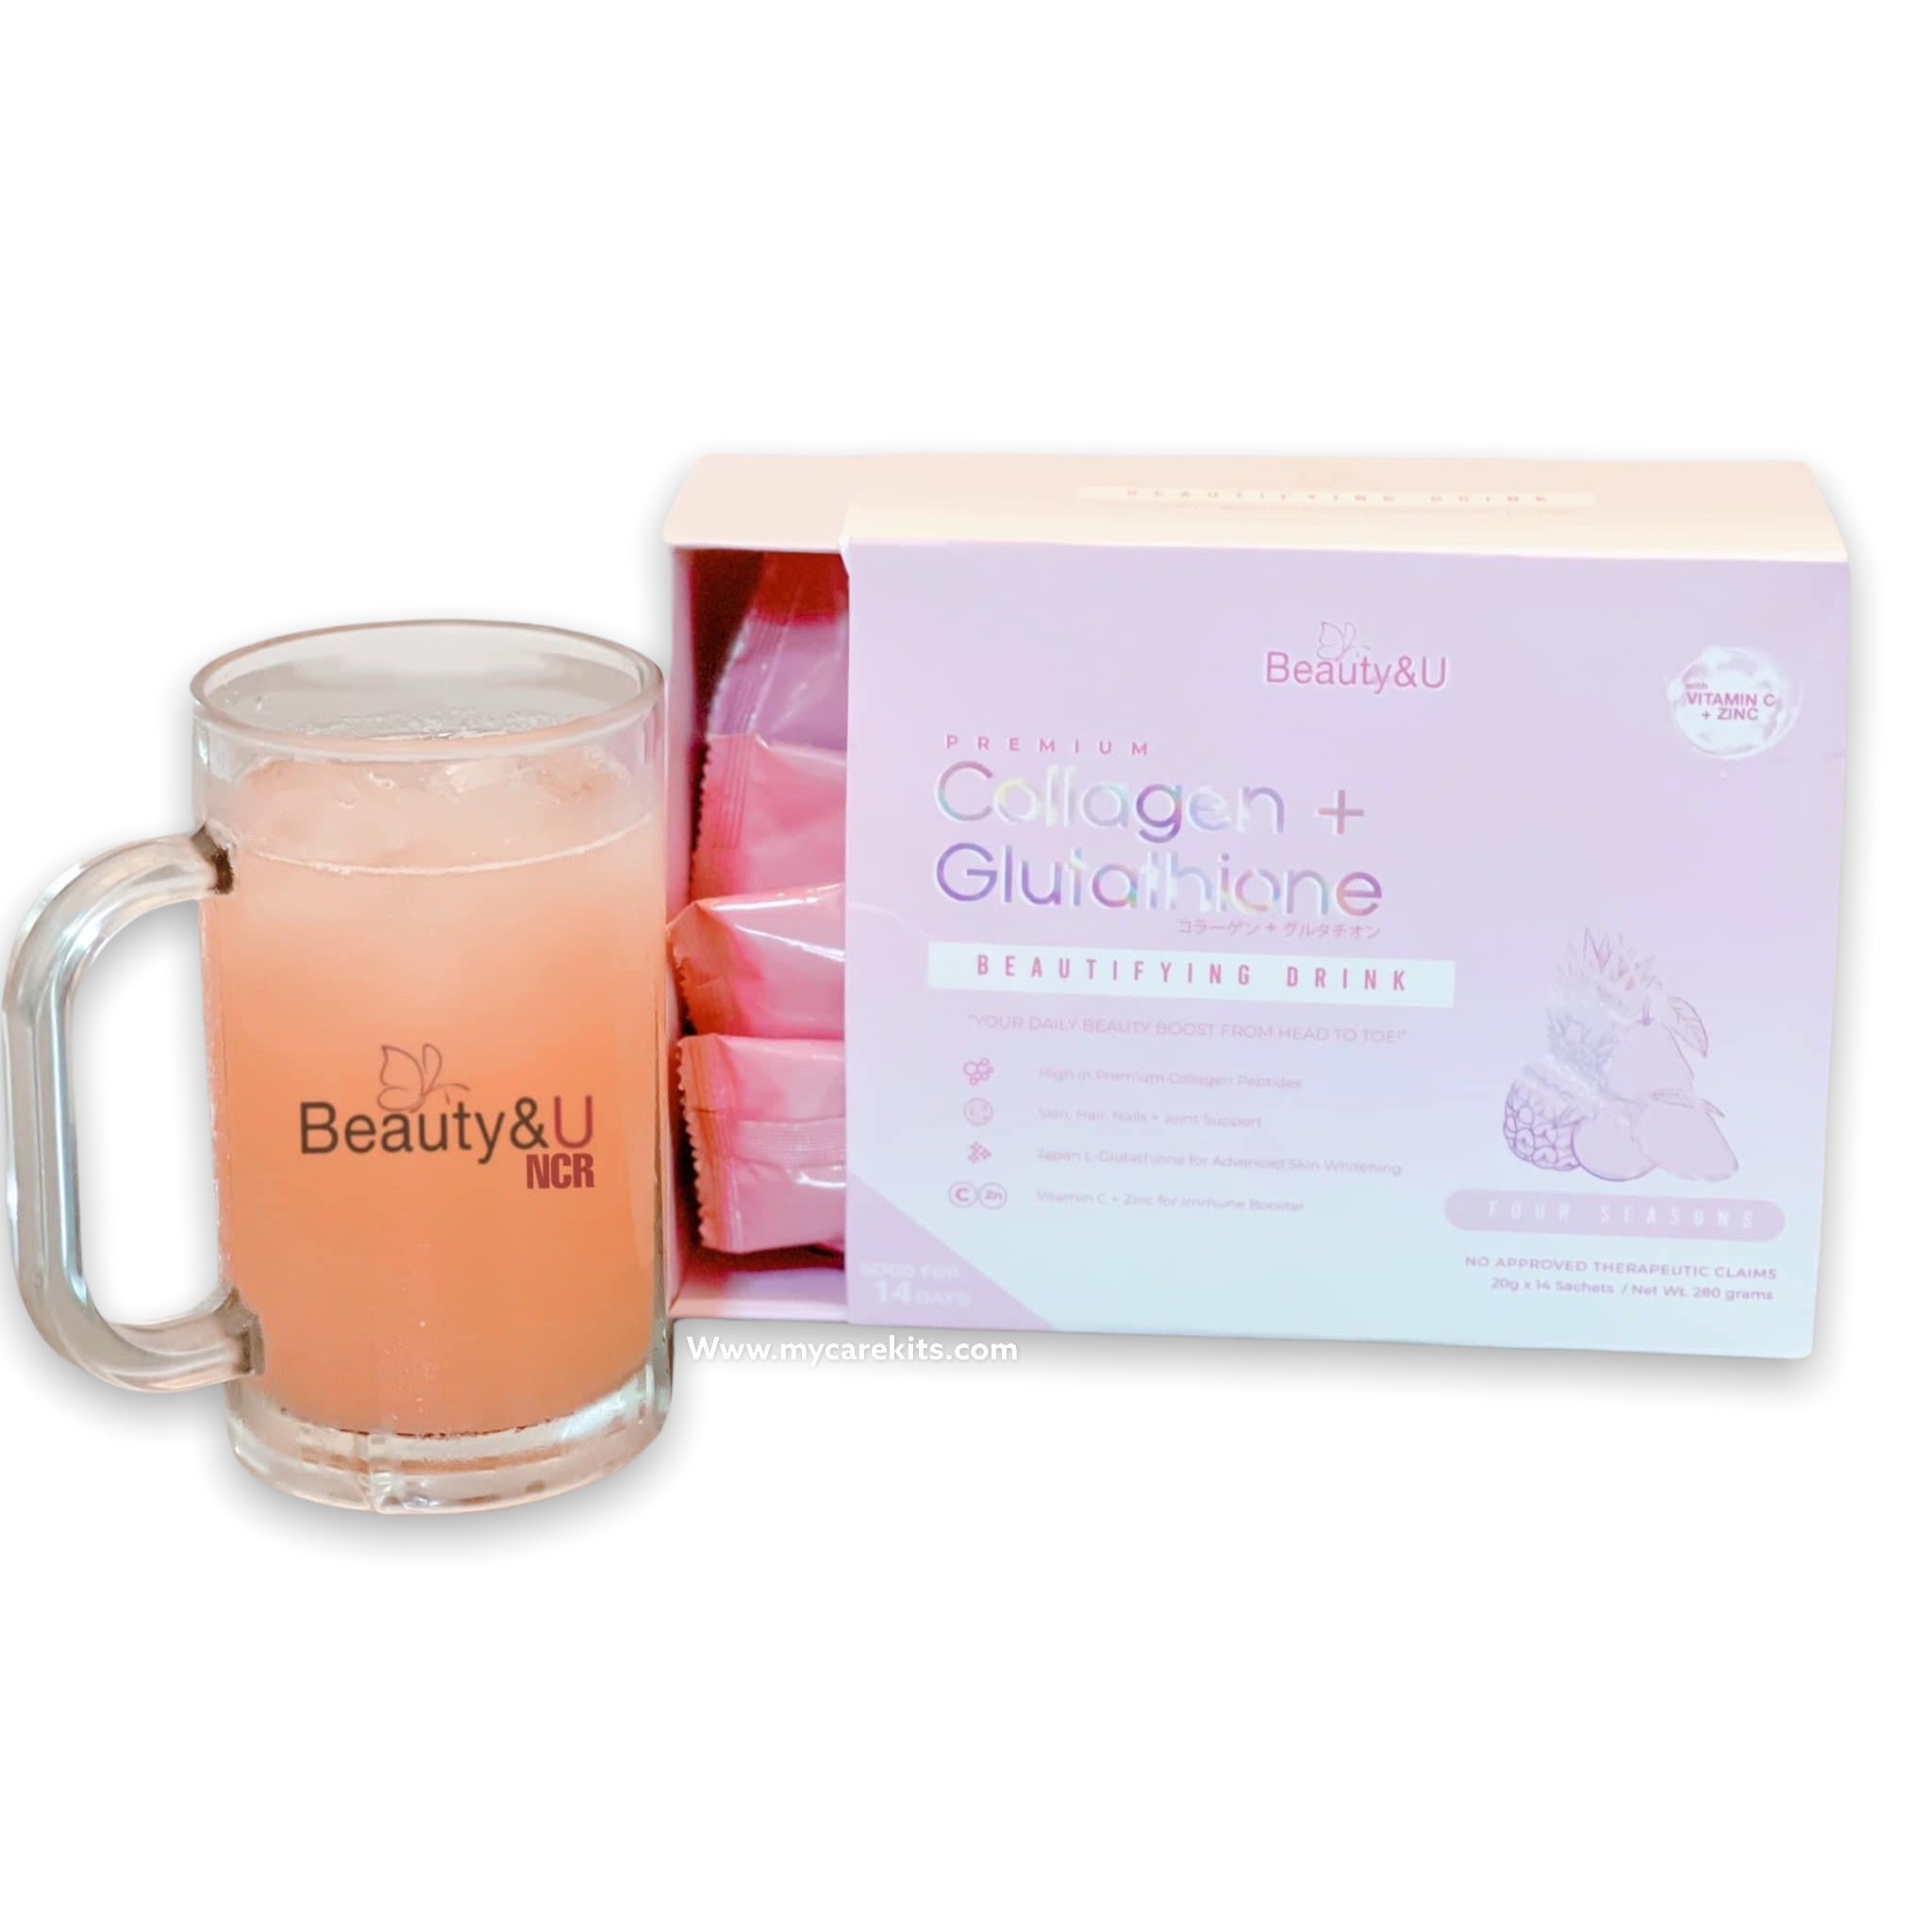 Beauty&U Premium Collagen Beautifying Drink with Vitamin C and Zinc - 14 sachets